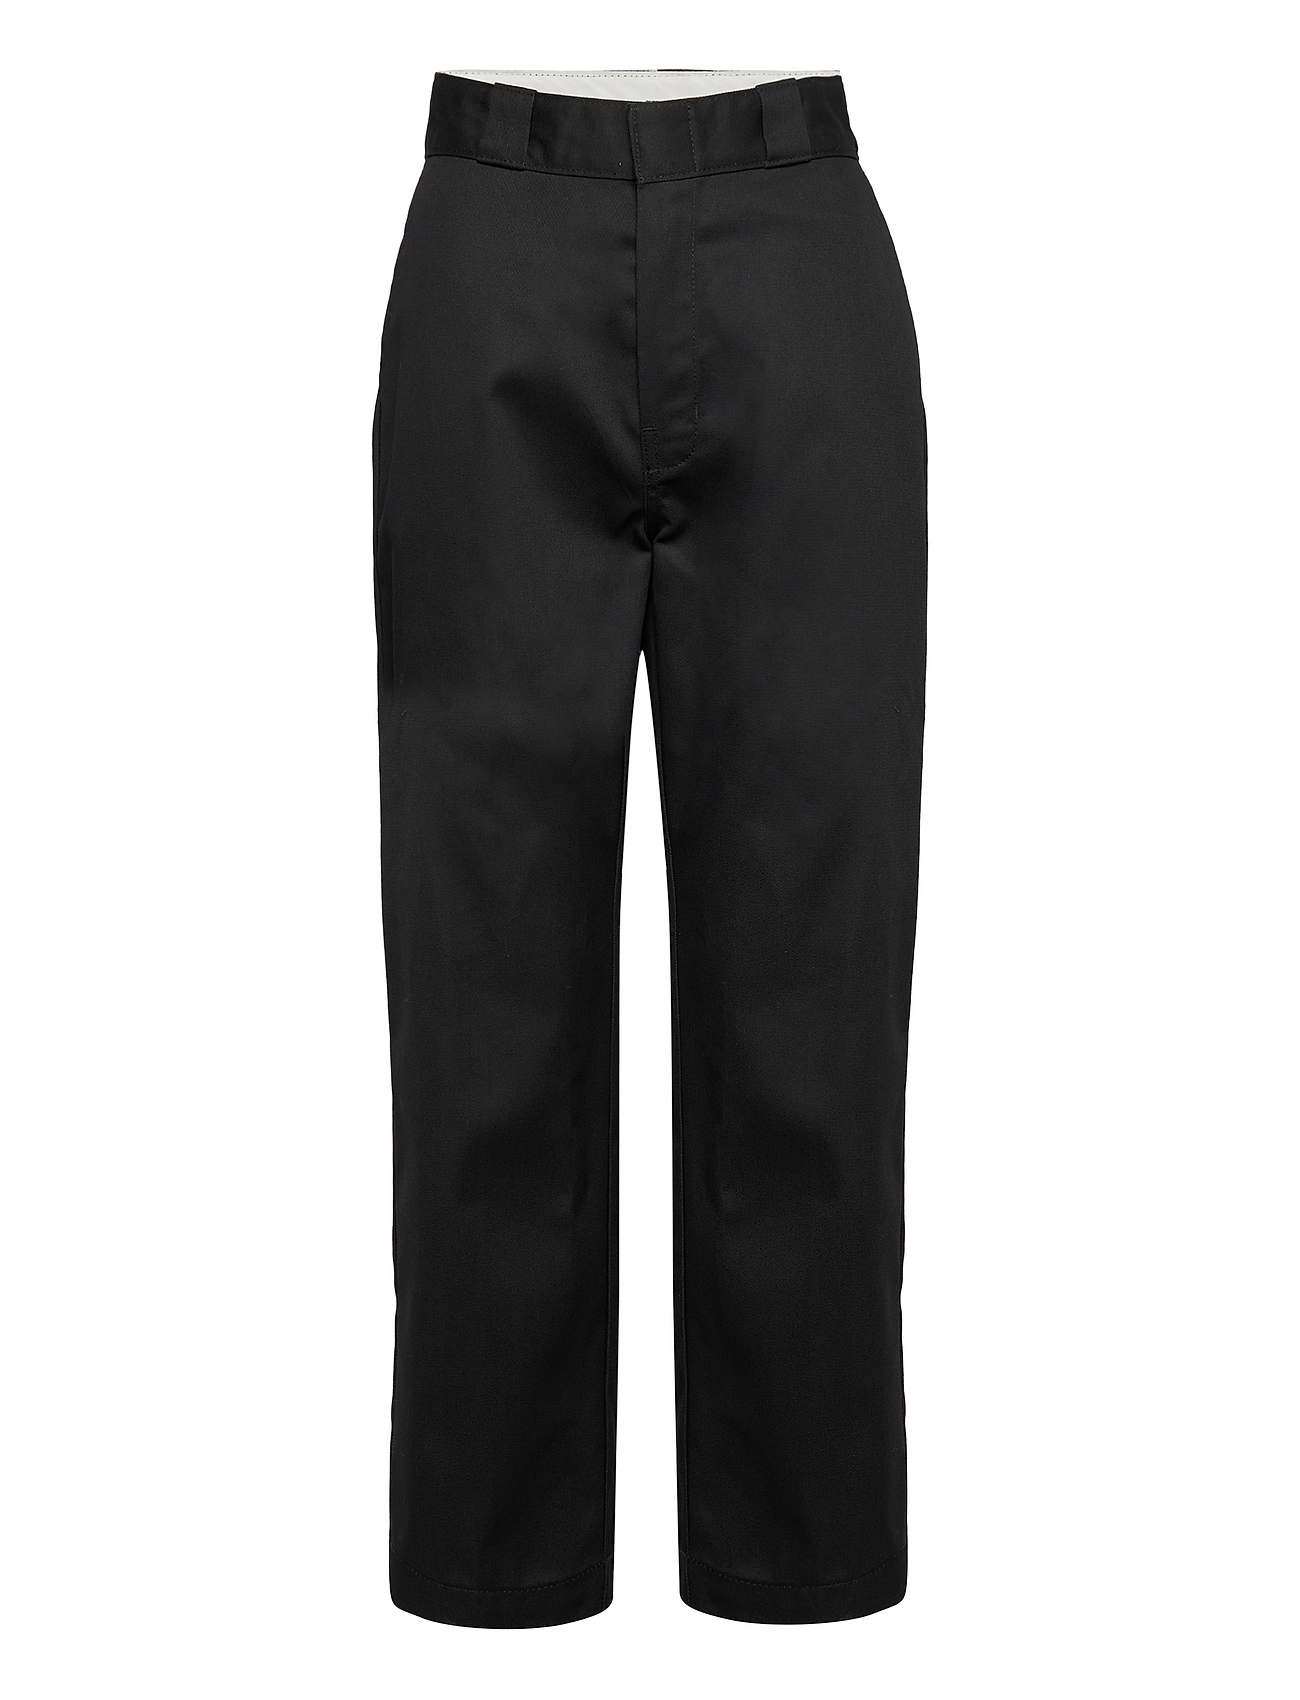 Elizaville Rec Bottoms Trousers Chinos Black Dickies